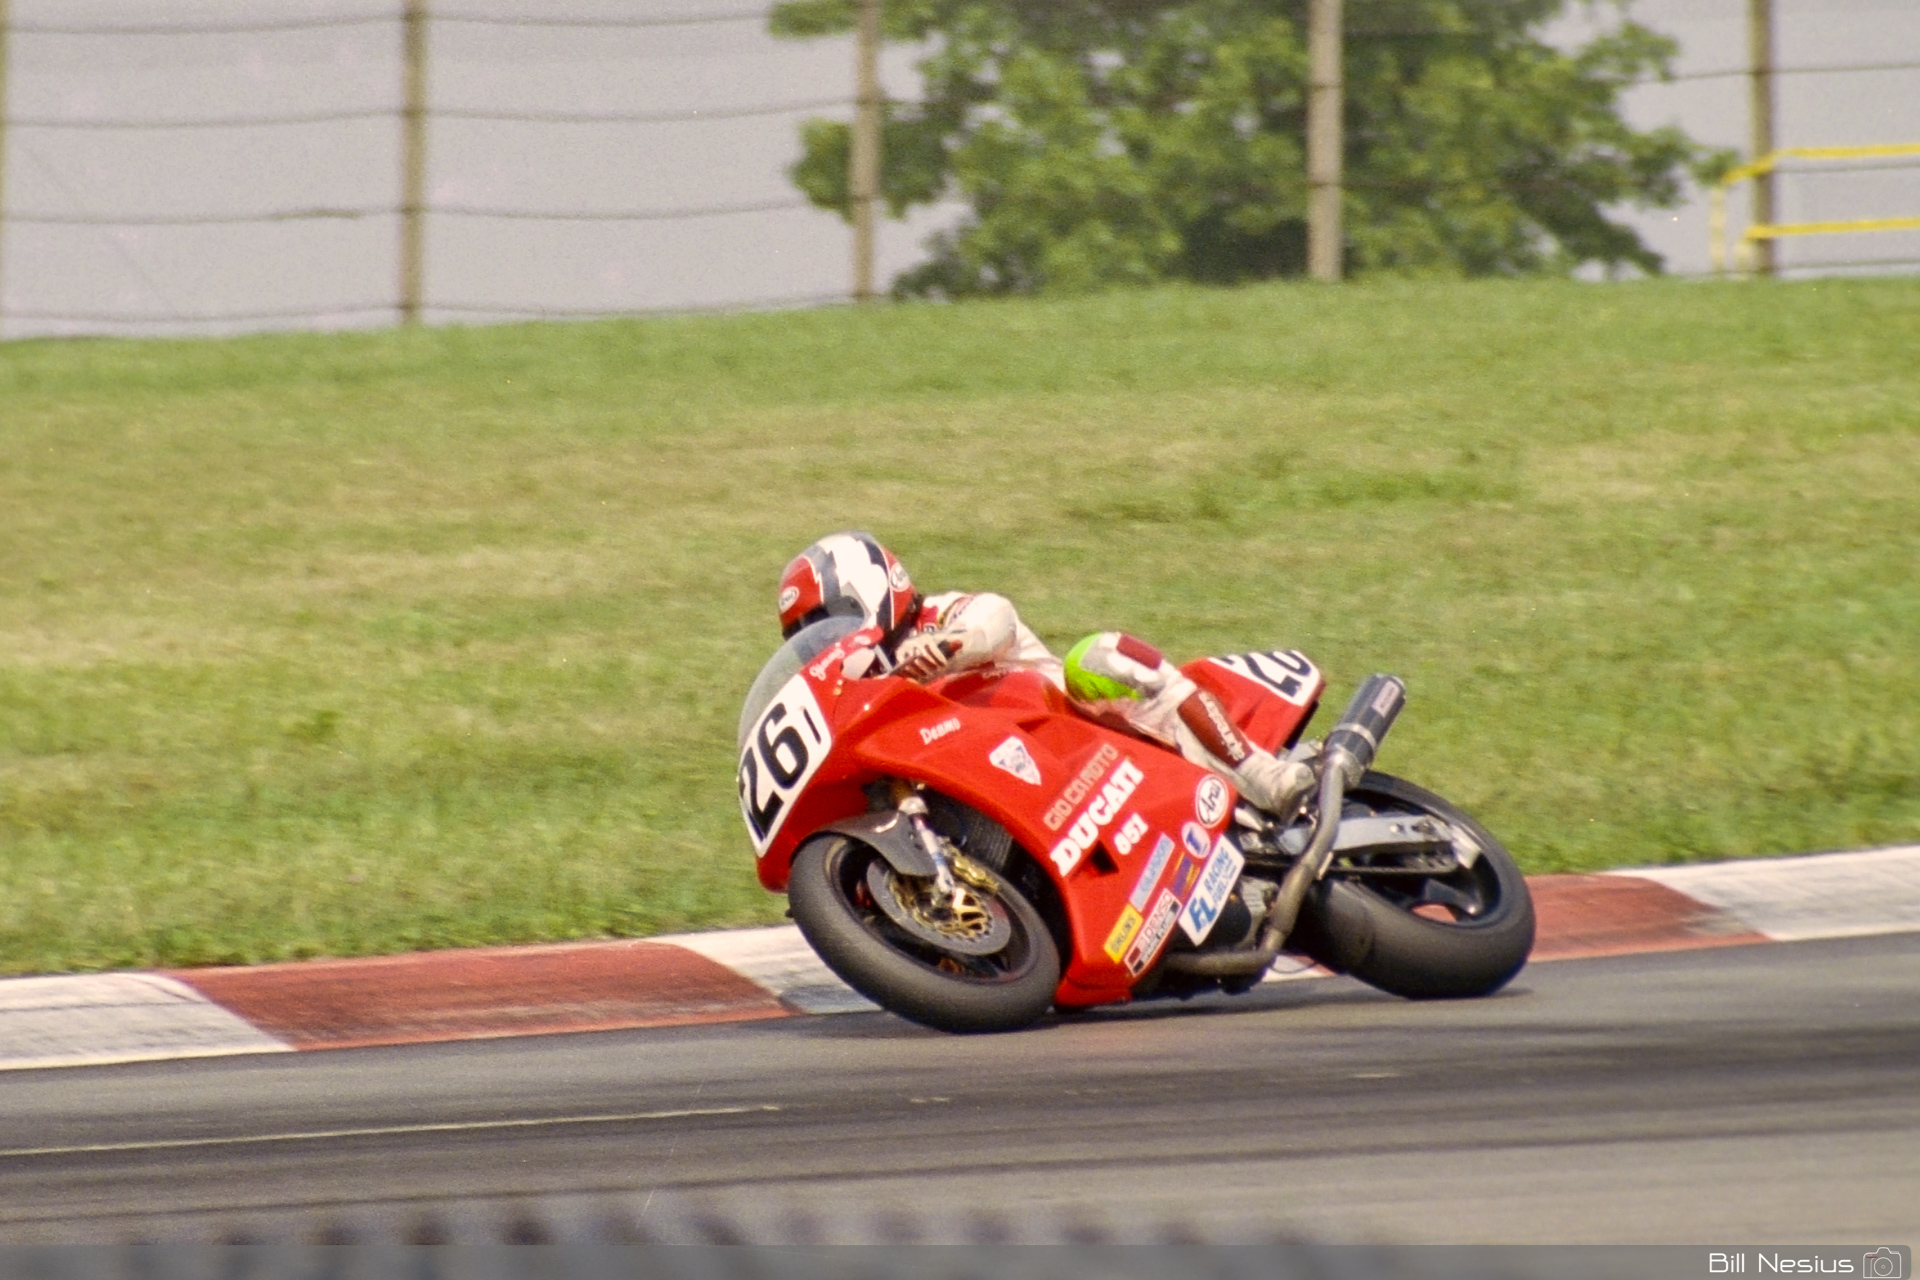 Jimmy Adamo on a the Number 26 Ducati 851 / FLM_7773 / 2